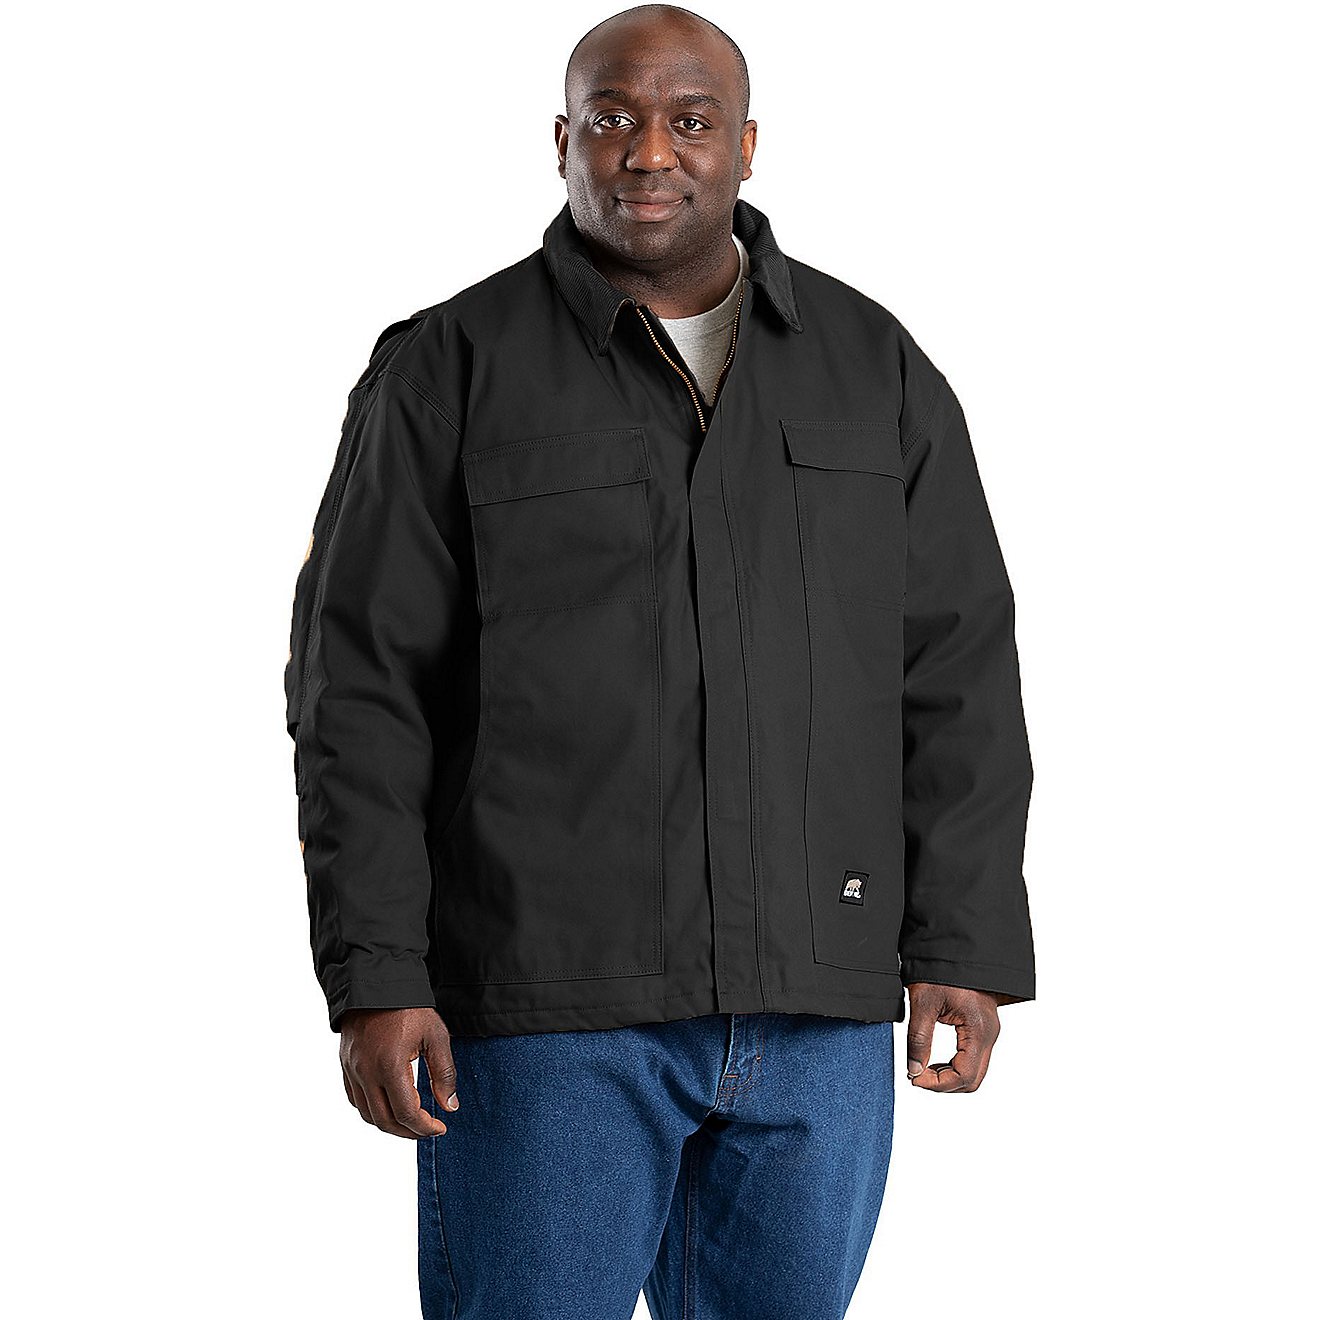 Berne Men's Heritage Chore Work Coat | Free Shipping at Academy